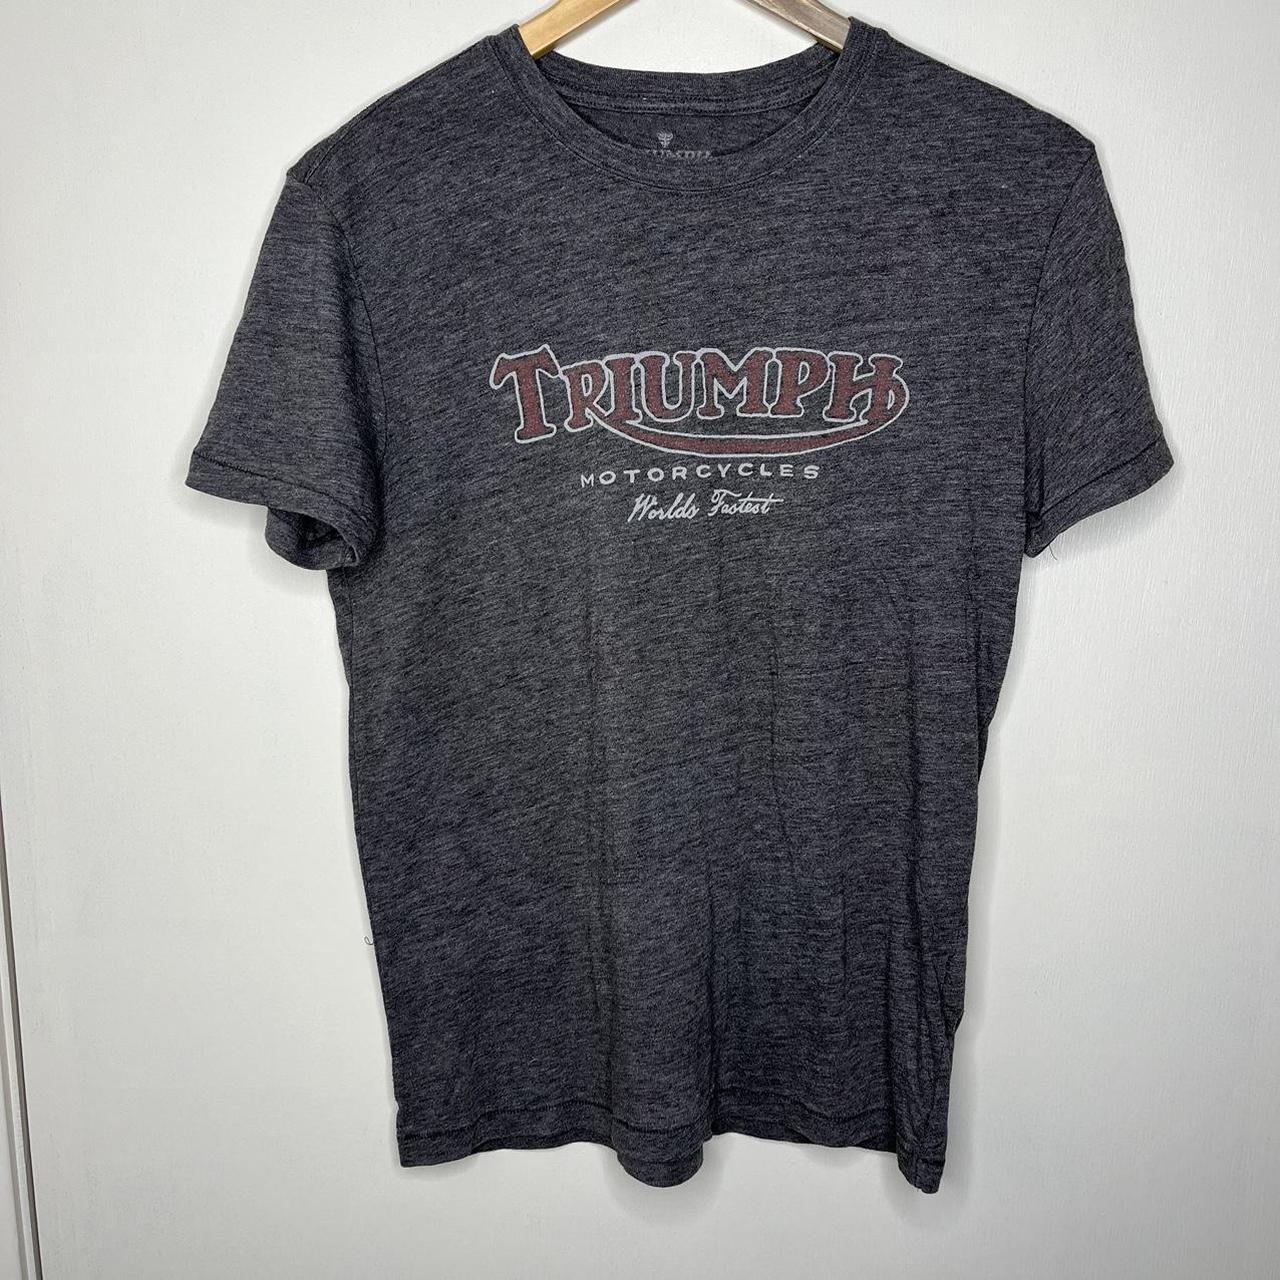 Lucky Brand Triumph t-shirt. Size small, but could